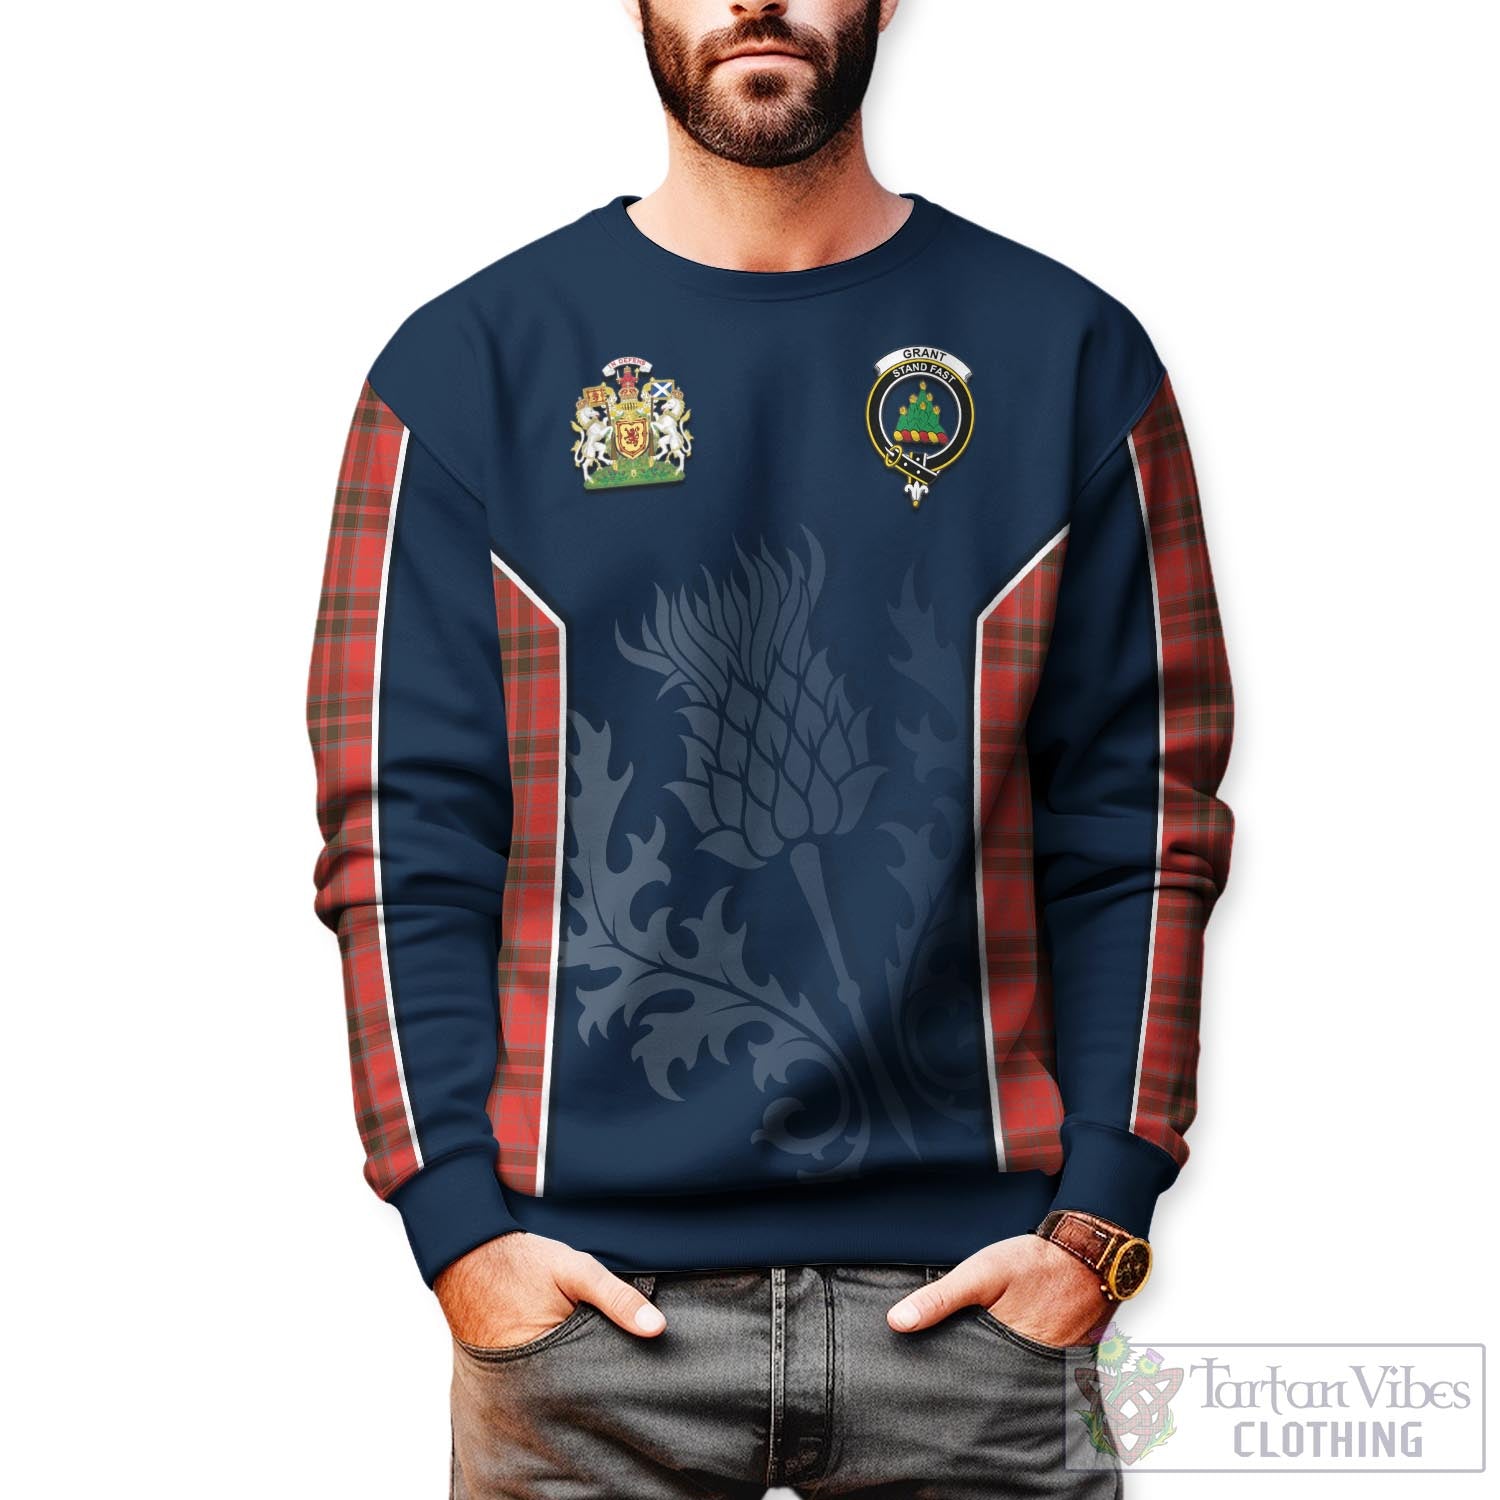 Tartan Vibes Clothing Grant Weathered Tartan Sweatshirt with Family Crest and Scottish Thistle Vibes Sport Style